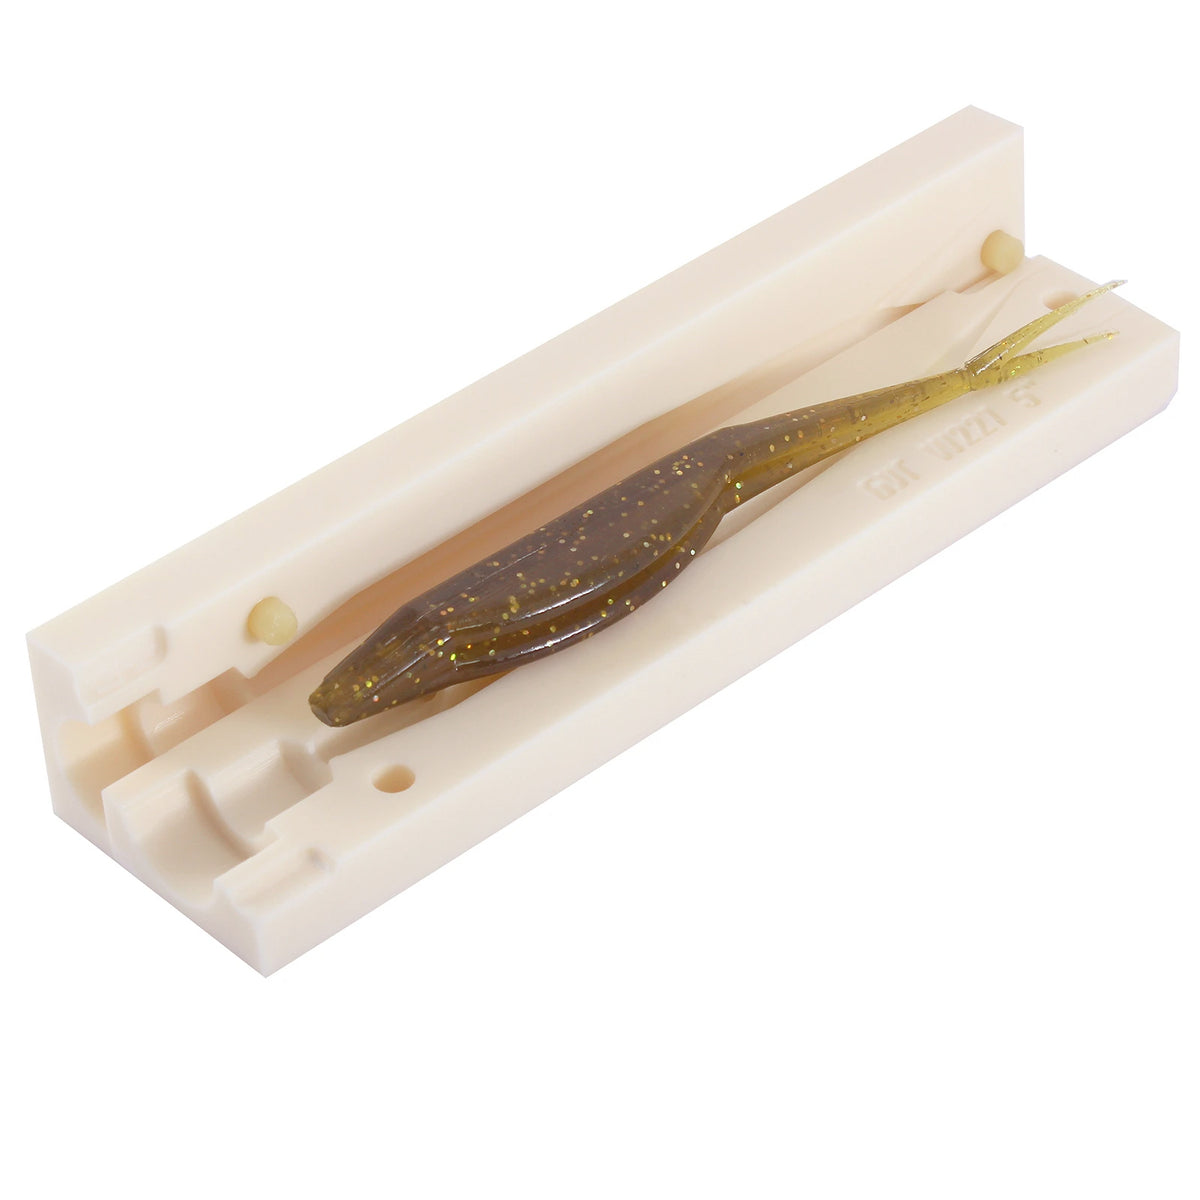 Soft Plastic Fluke Bait Mold 5 Inch Soft Jerkbait Lure - 1 Cavity Mold.  Bugmolds USA offers a high quality stone mold for soft plastics fishing  baits. This mold is a single